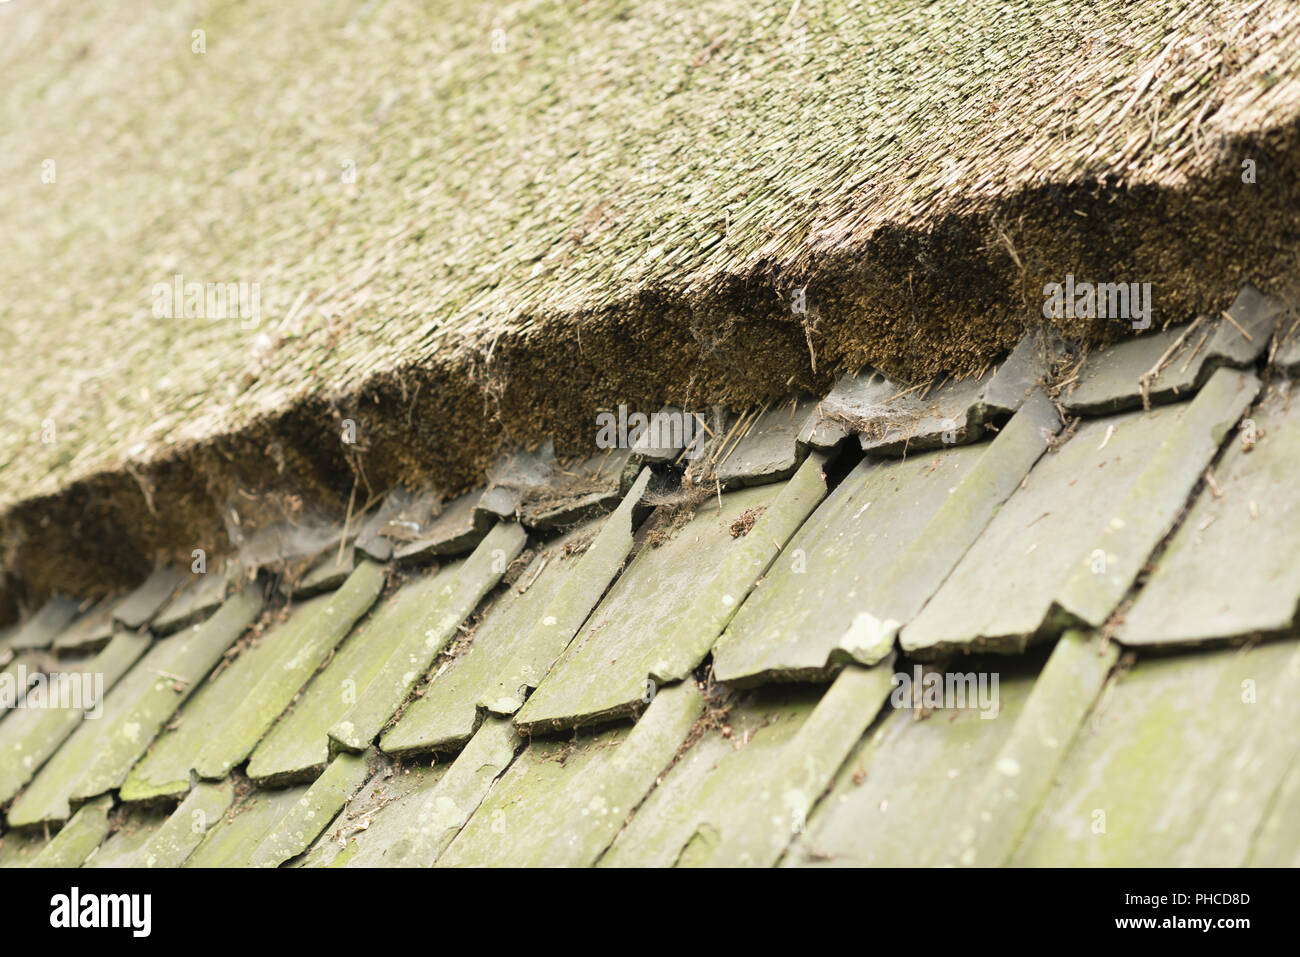 Transition slanted tiled roof to cane Stock Photo